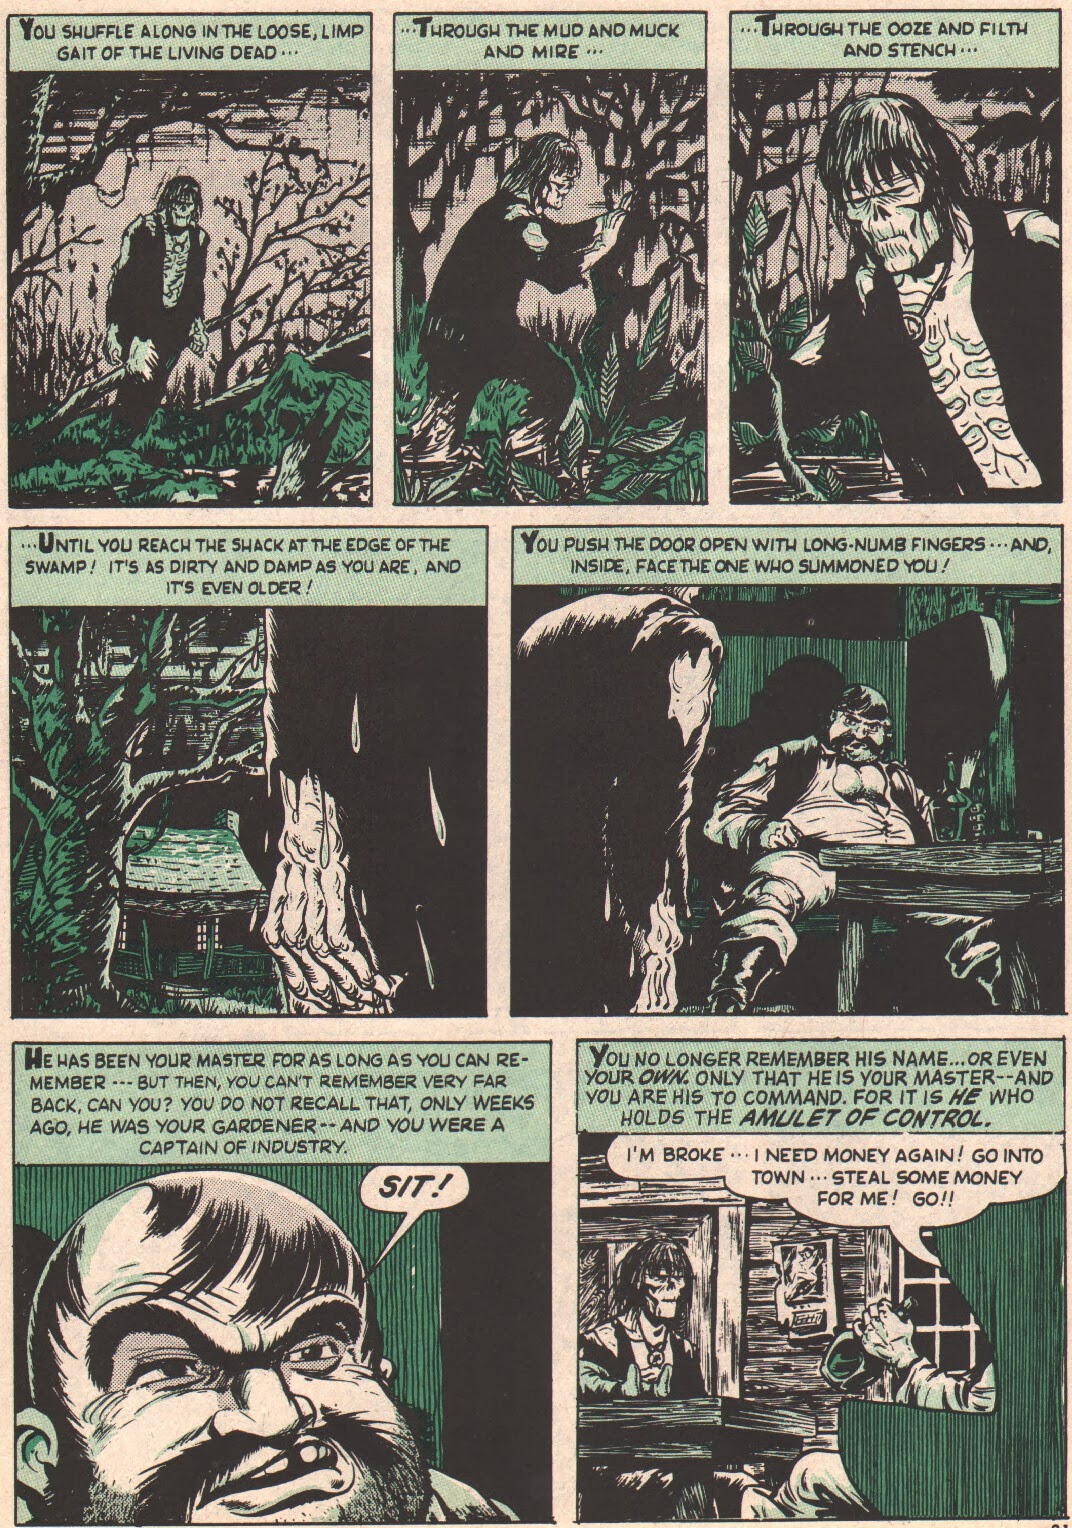 Tales+of+the+Zombie+%231+(1973)+Zombie+p.2.jpg